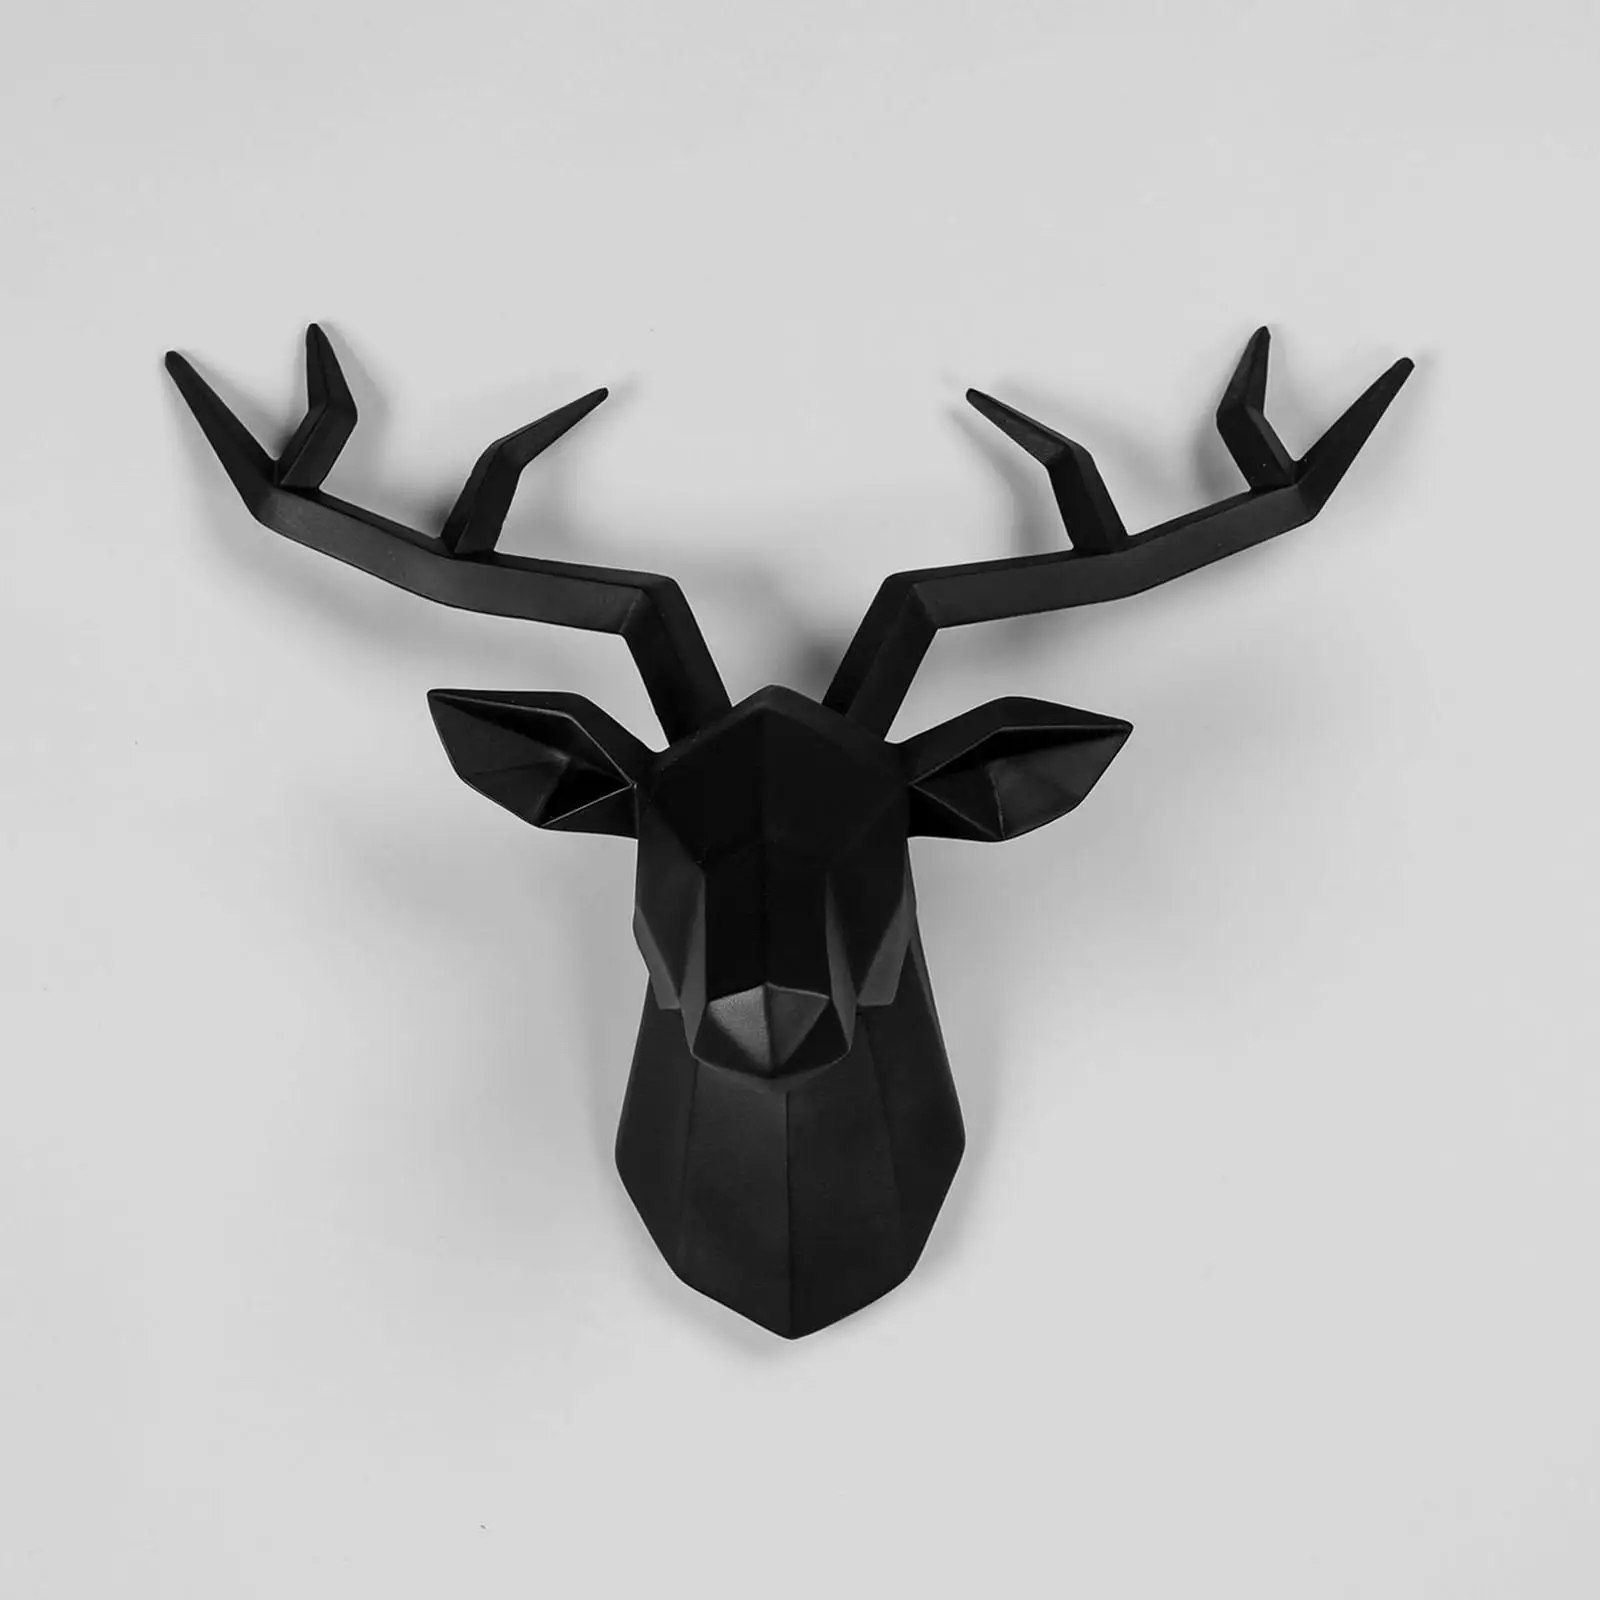 3D Animal Statue Figurines Antlers Wall Mounted Simulation Office Decoration